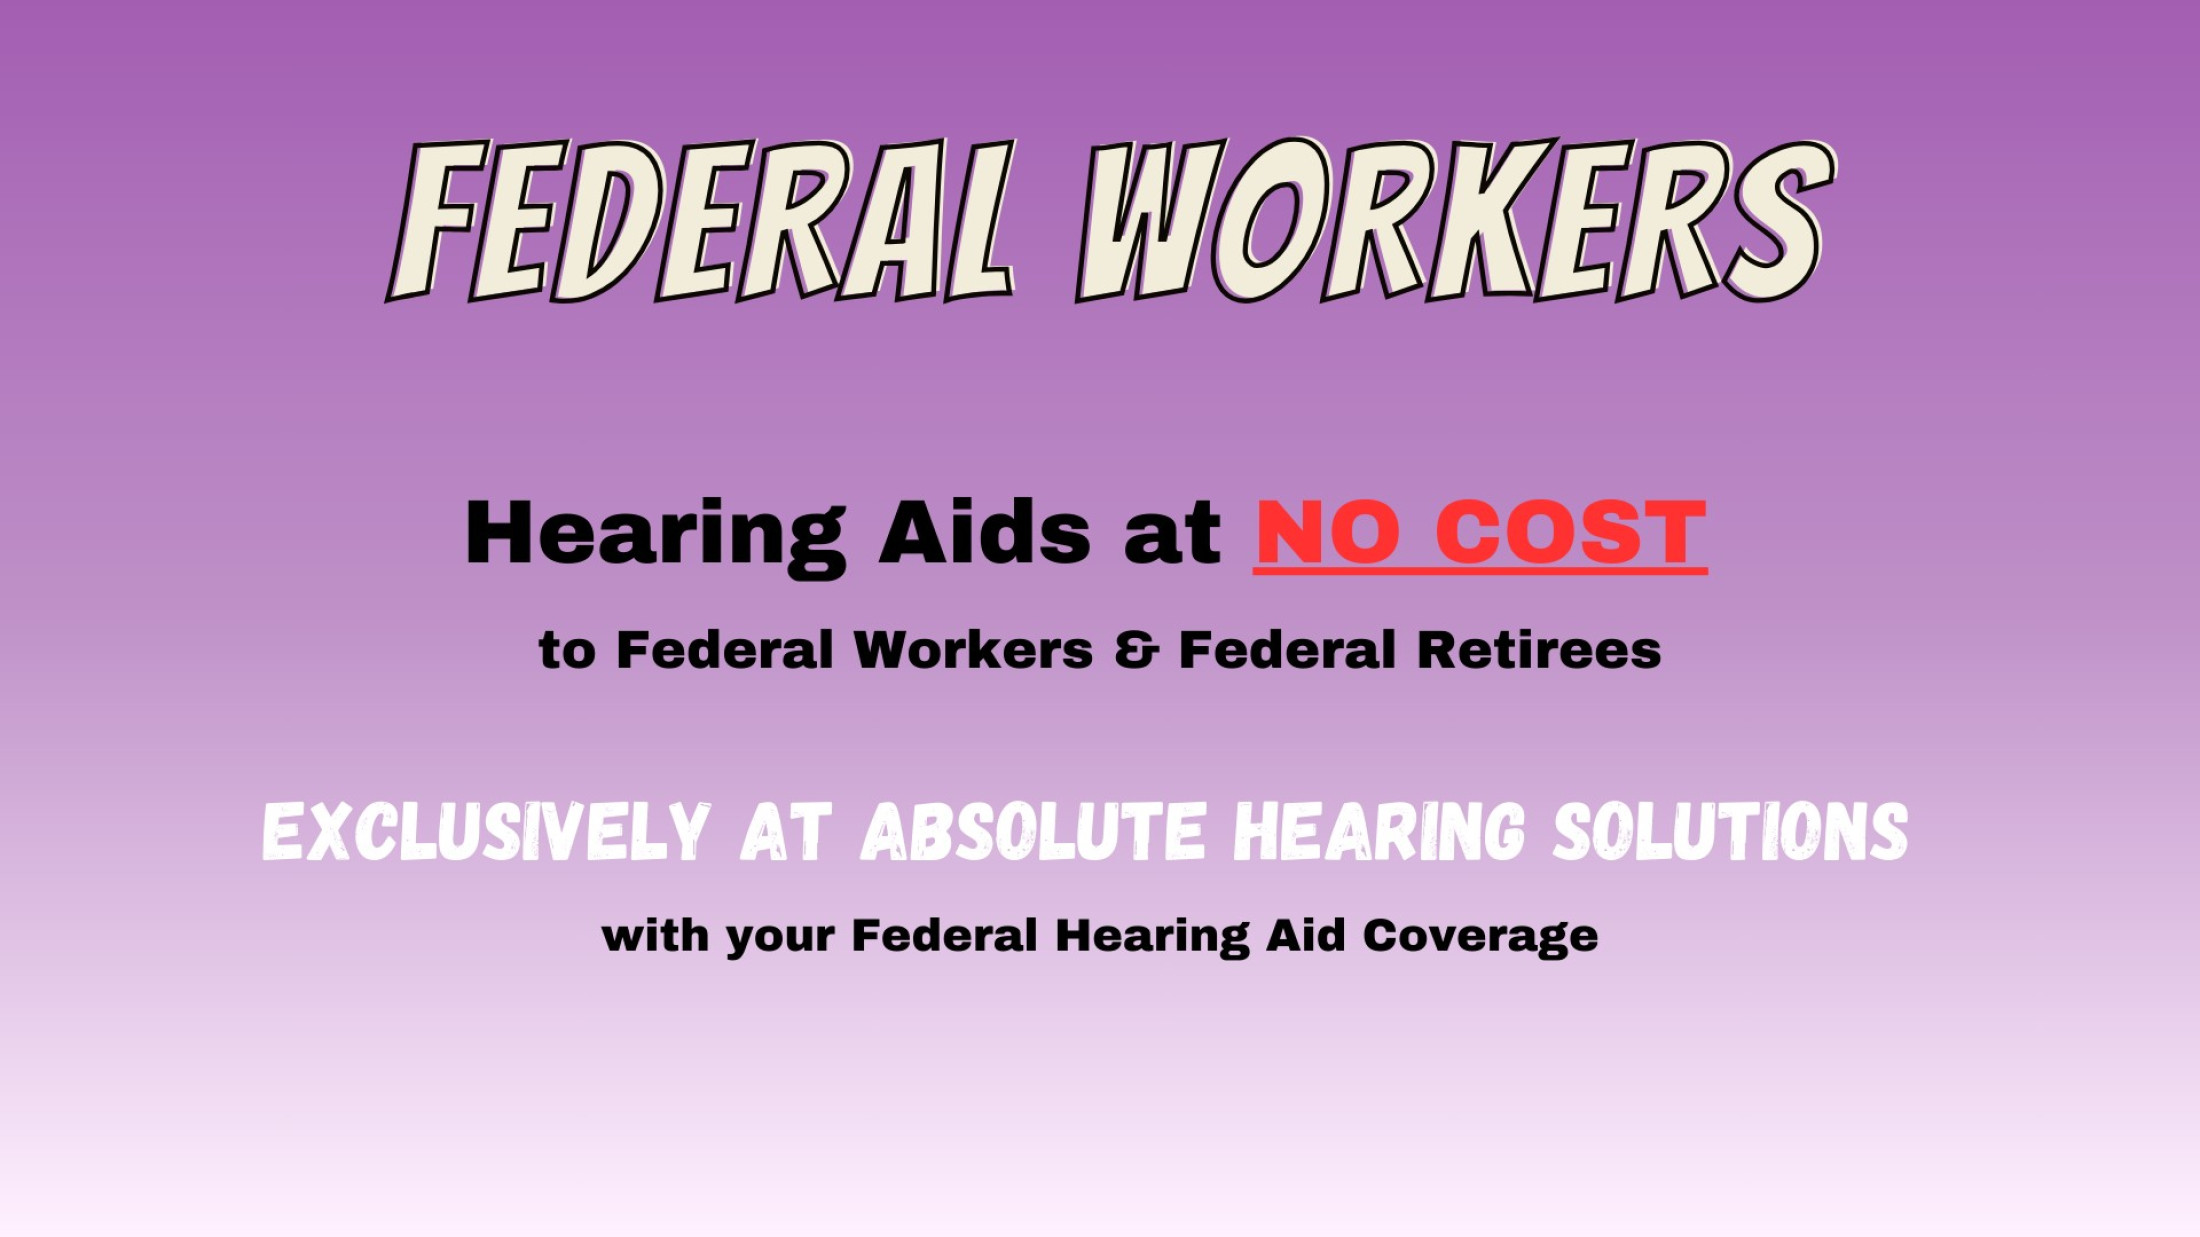 Hearing Aids at No Cost to Federal Workers & Federal Retirees